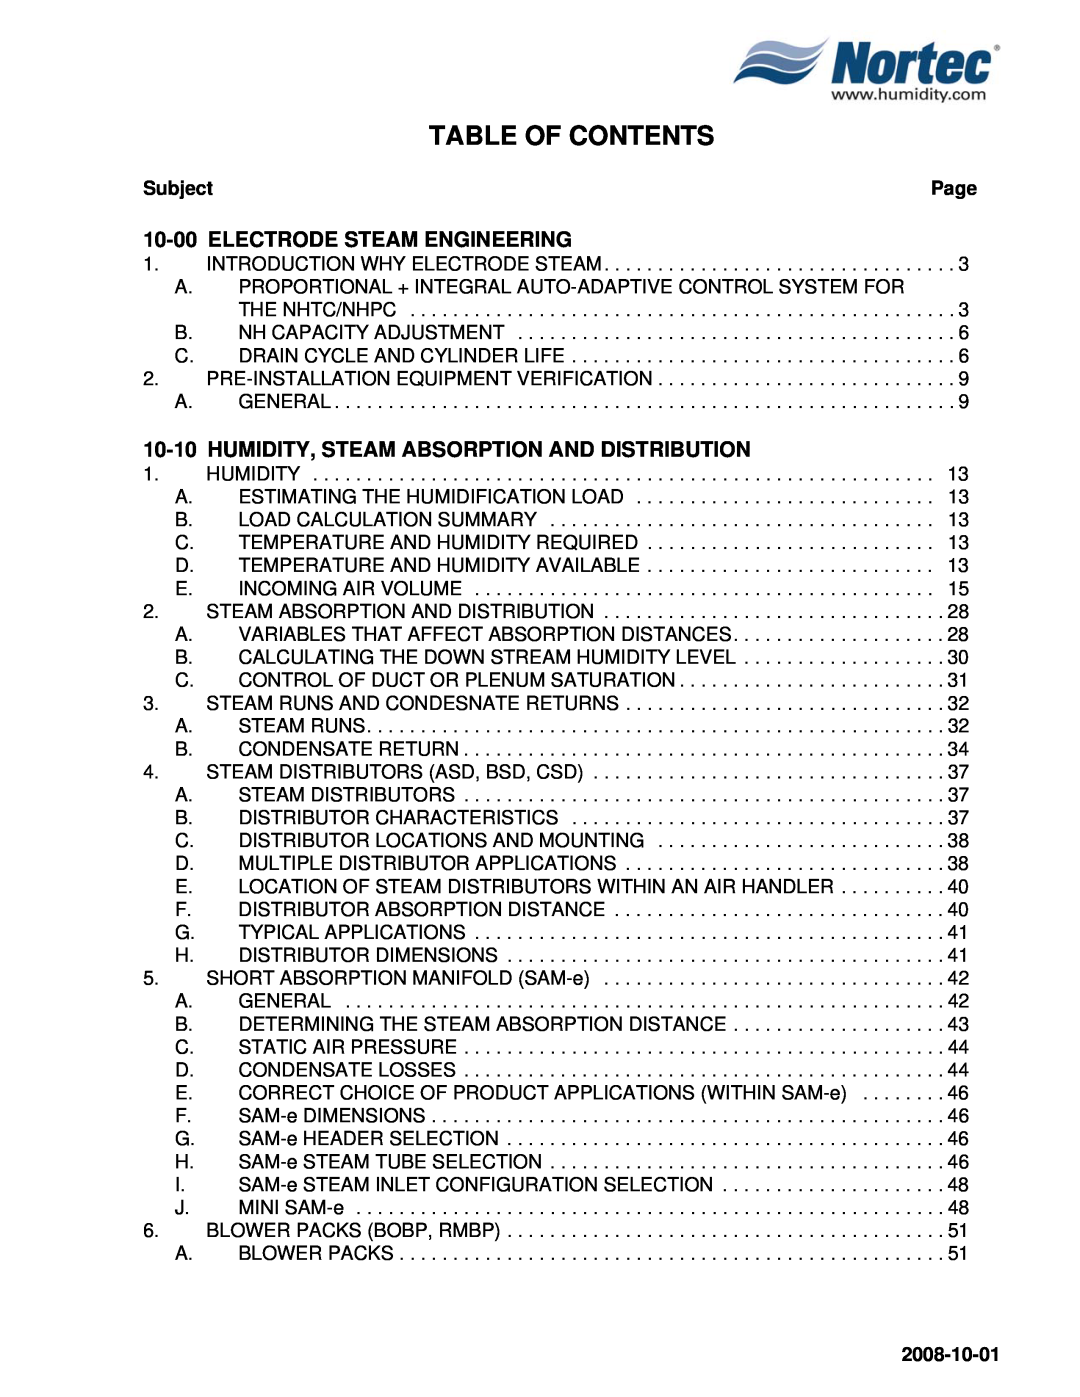 Nortec NHTC Table Of Contents, 10-00ELECTRODE STEAM ENGINEERING, 10-10HUMIDITY, STEAM ABSORPTION AND DISTRIBUTION, Subject 